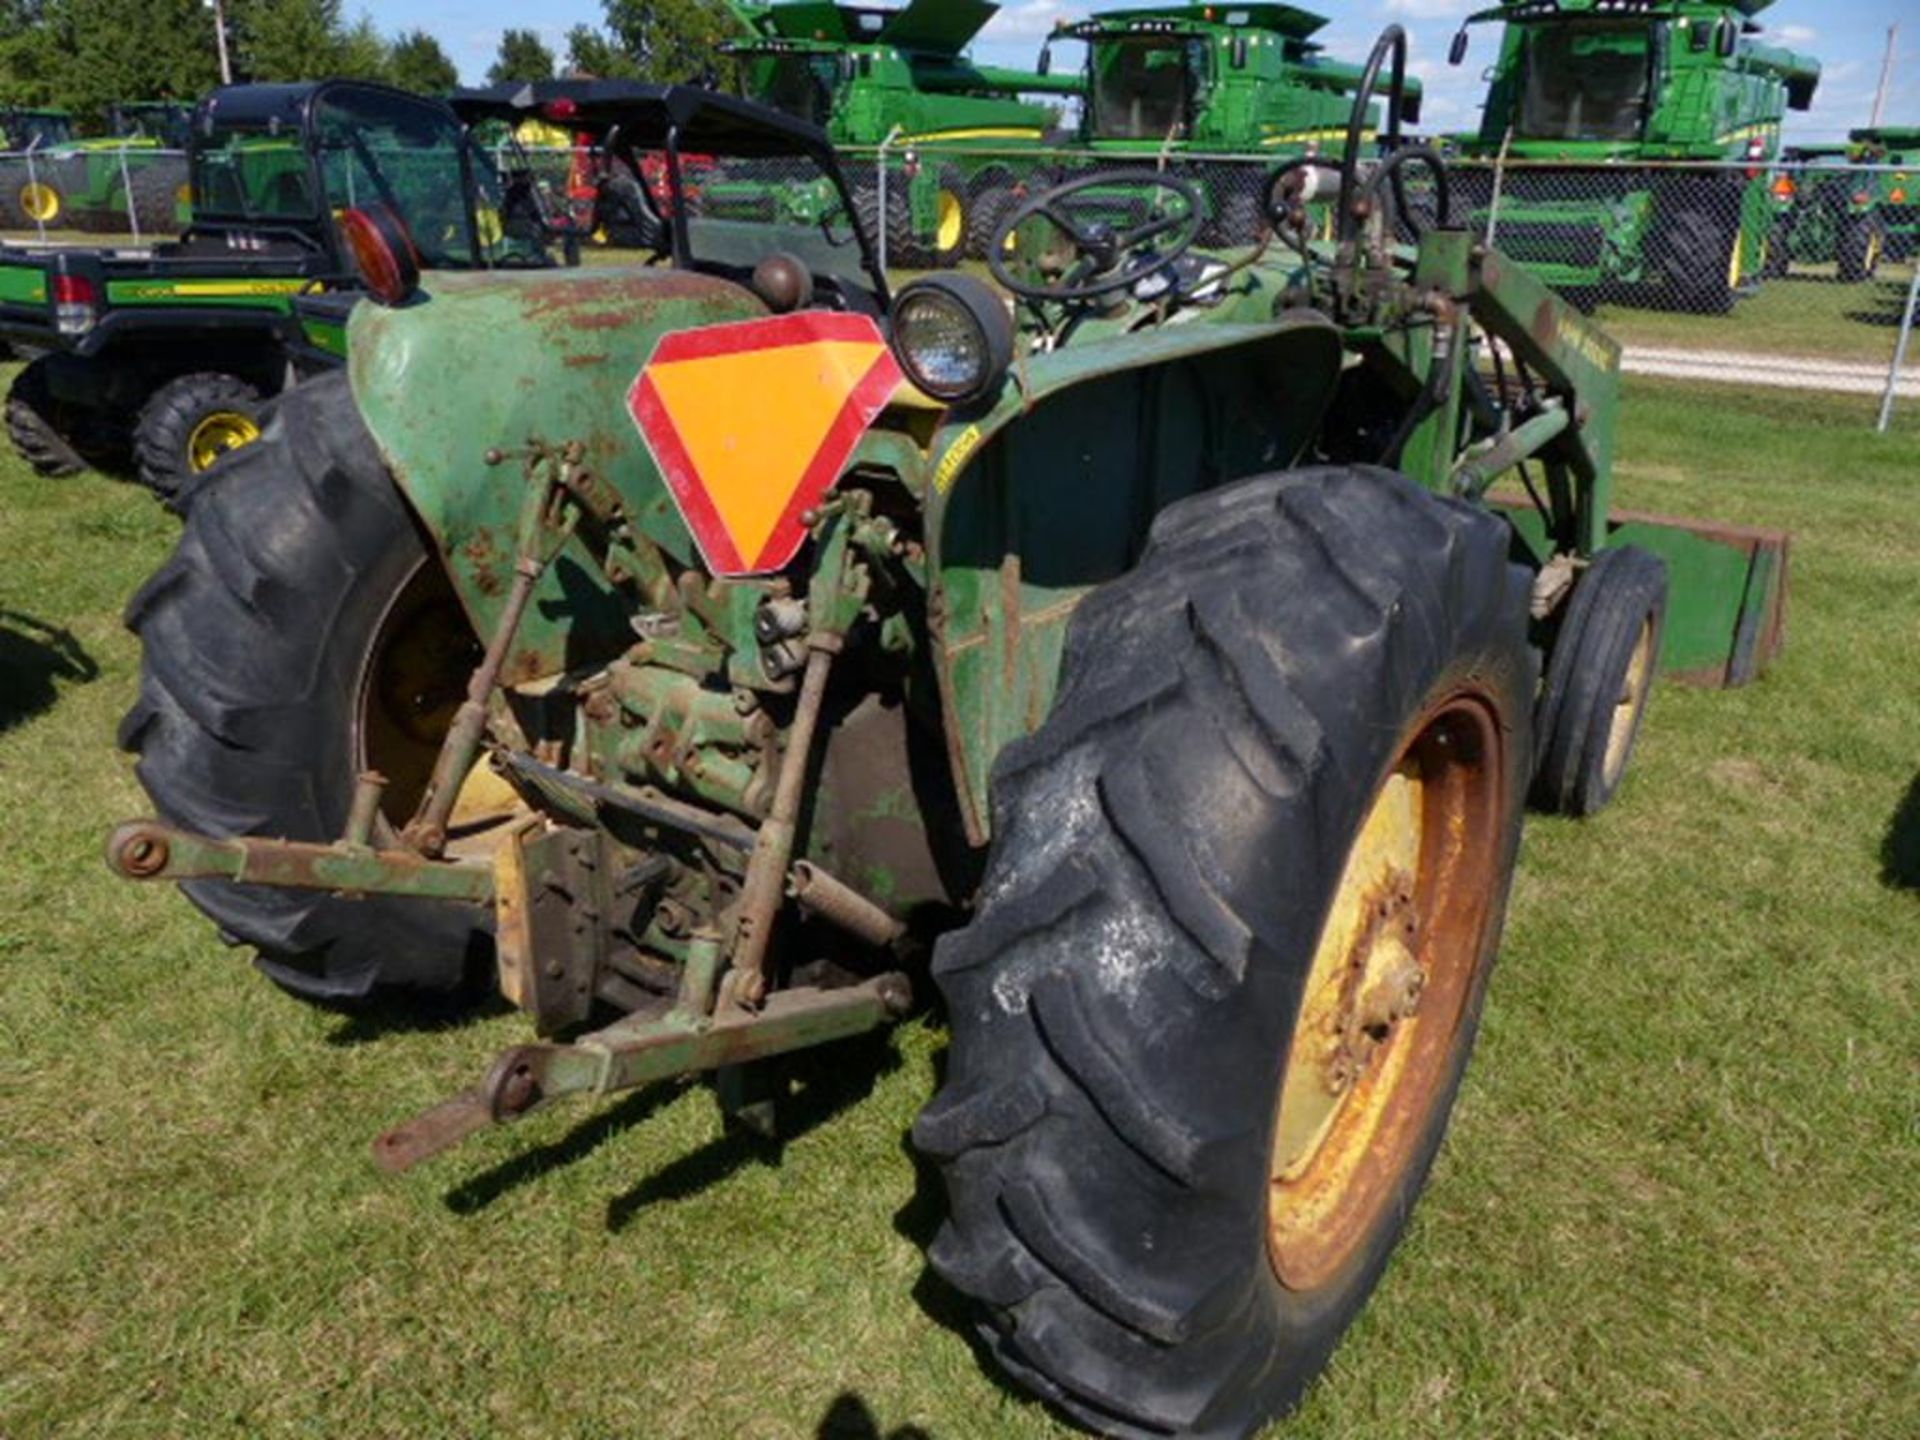 JD 2010 TRACTOR, GAS, 3 PT, 540 PTO, REAR SCV, 36A LOADER WITH 78" BUCKET, SHOWS 3674HR - Image 3 of 4